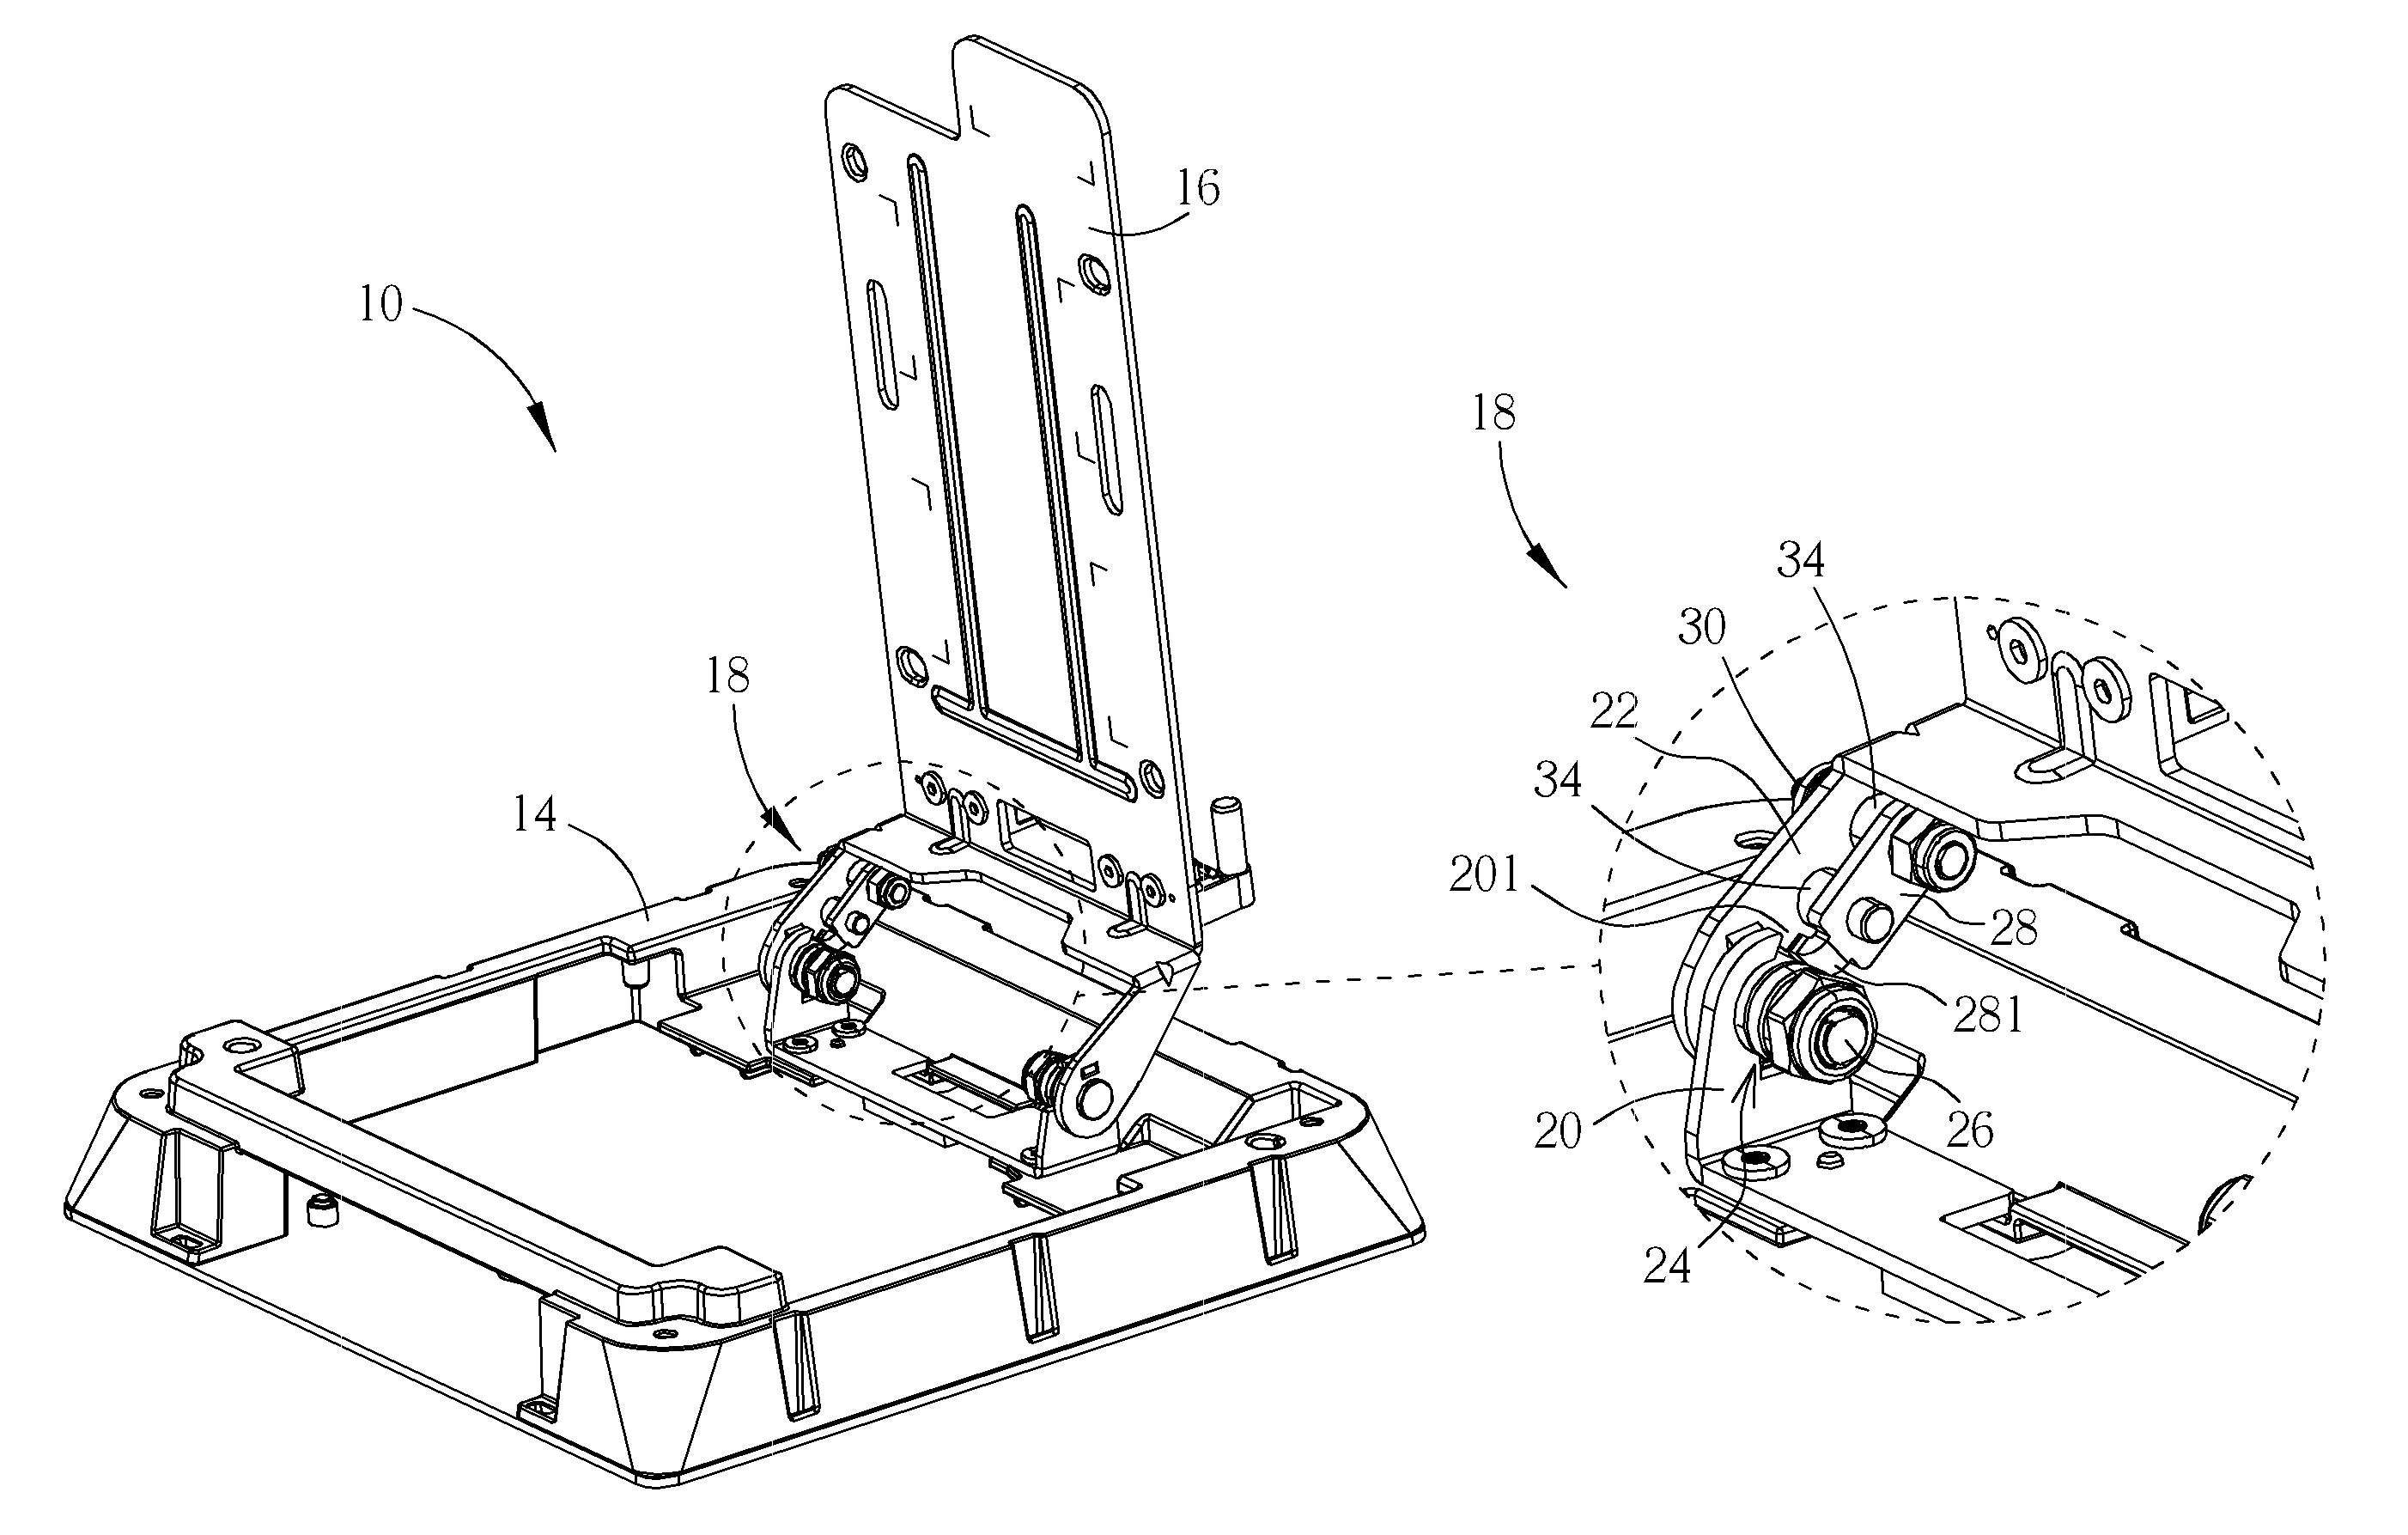 Panel positioning mechanism and display device with different positioning modes